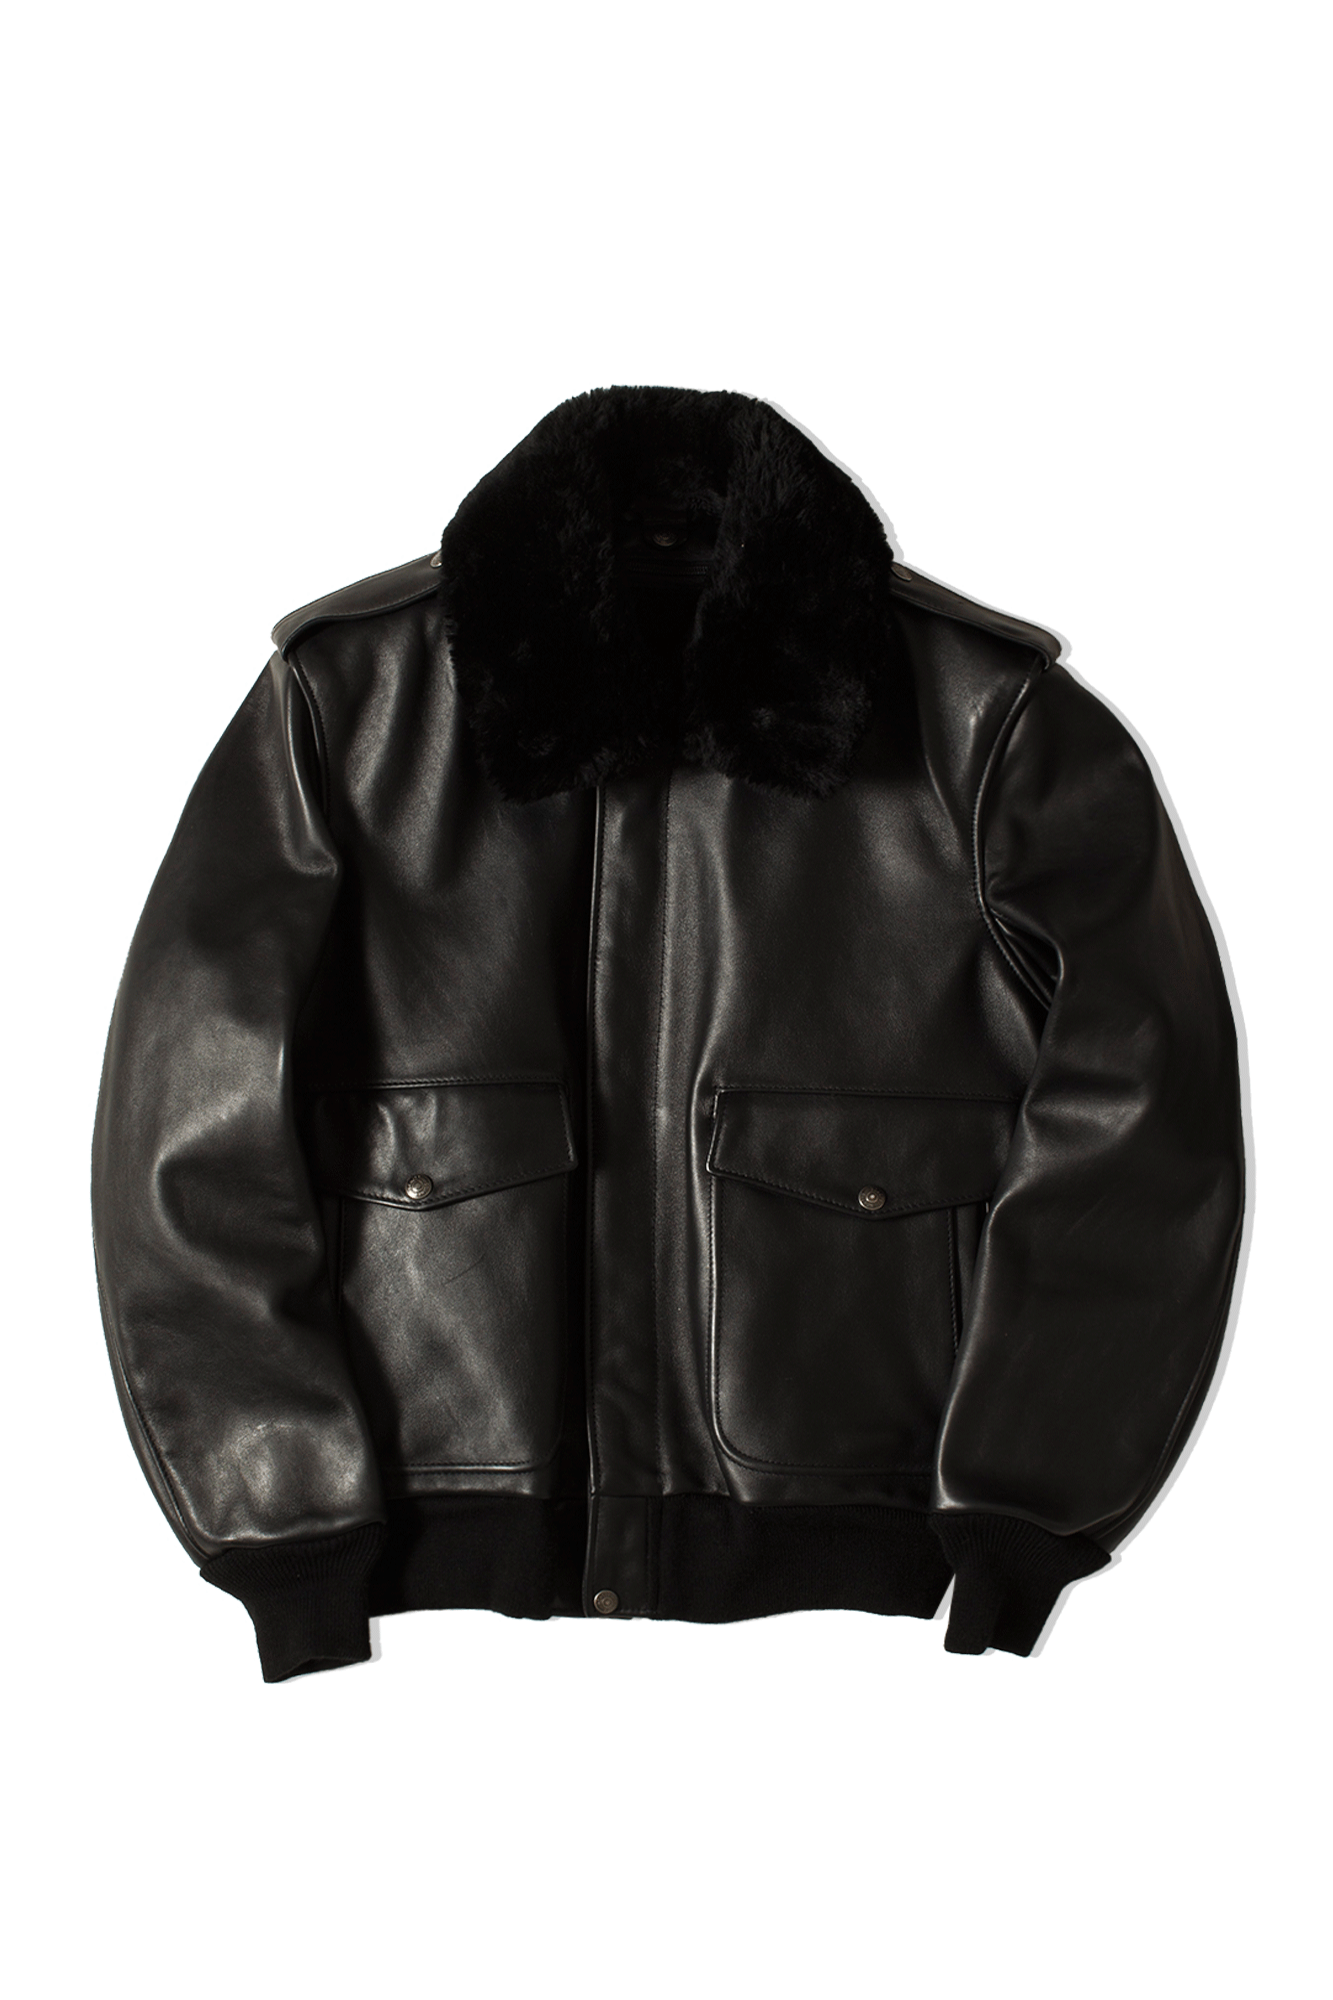 Schott Giacche di pelle A-2 Naked Cowhide Leather Flight Jacket Nero 184SMBLACK#000#BLACK#36 - One Block Down